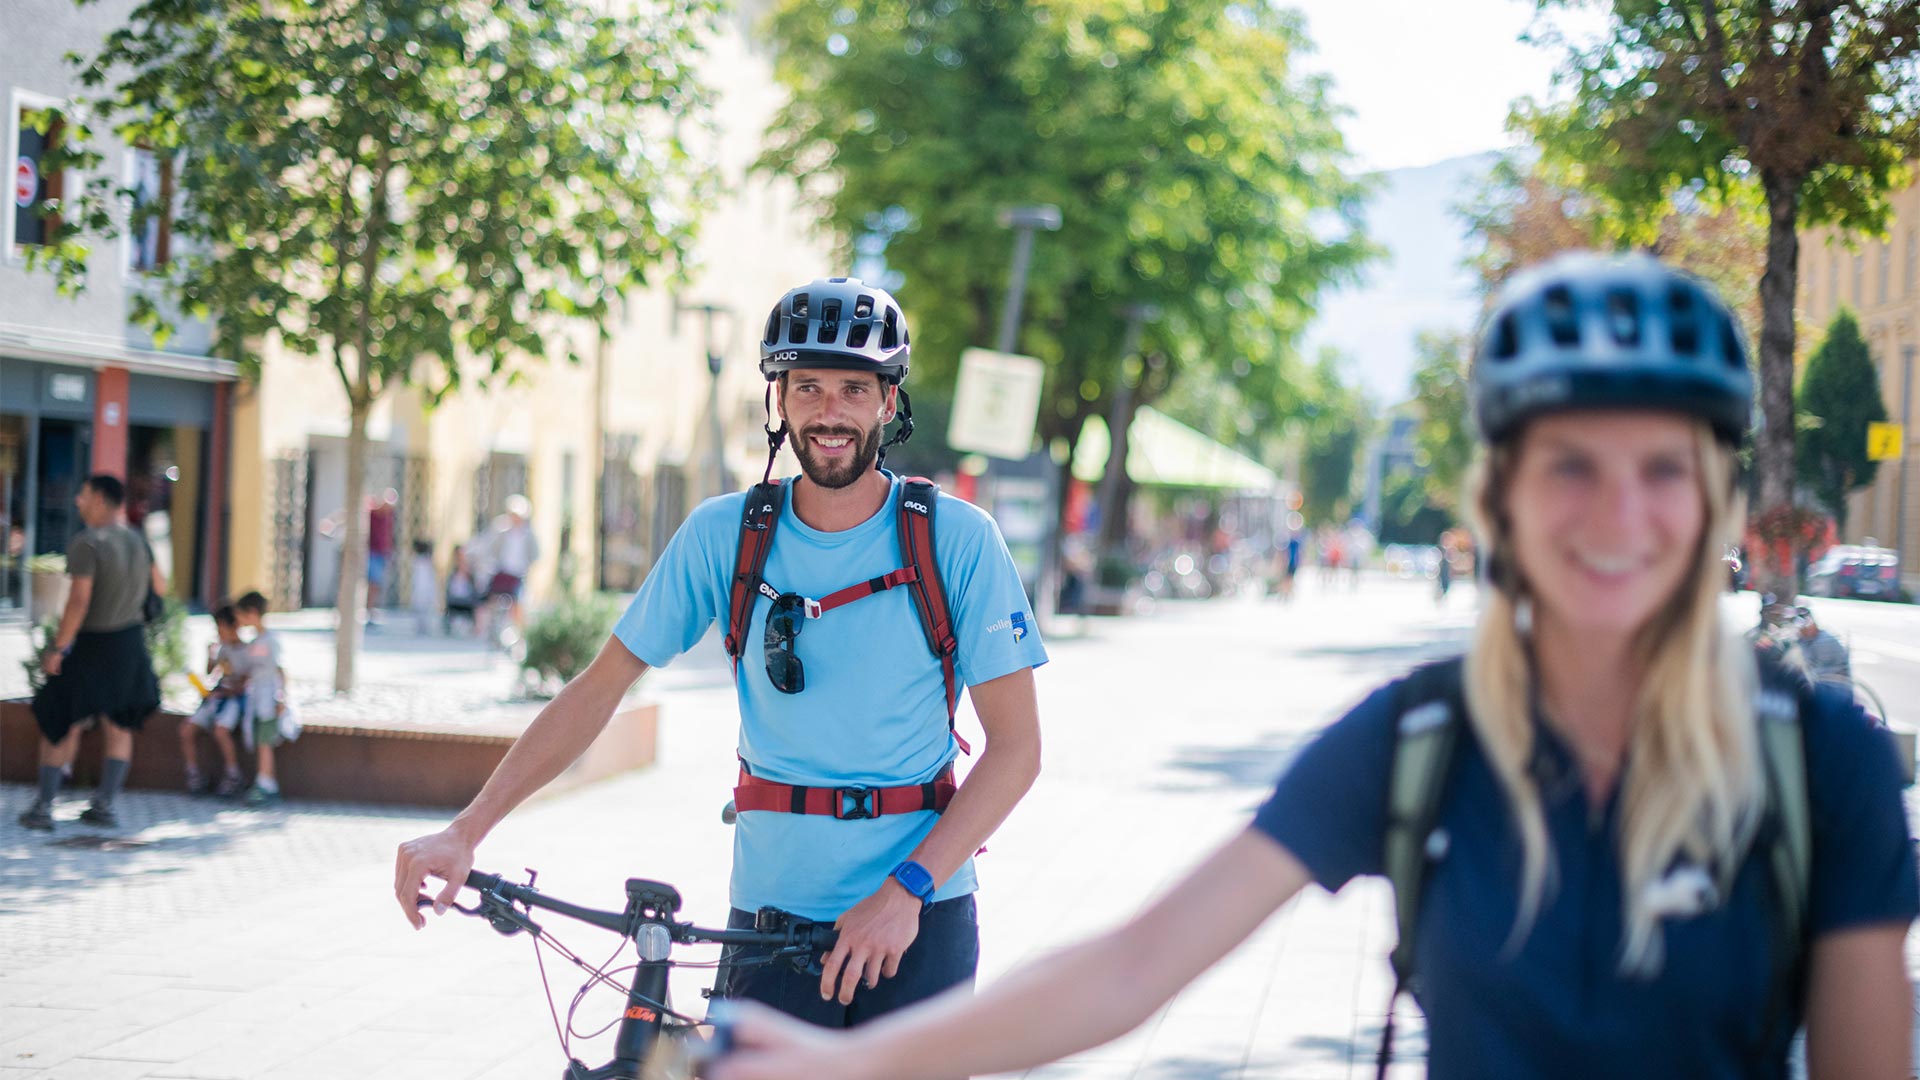 In the foreground, a cyclist dressed in blue walks along the streets of Bolzano, smiling with his mountain bike in hand.